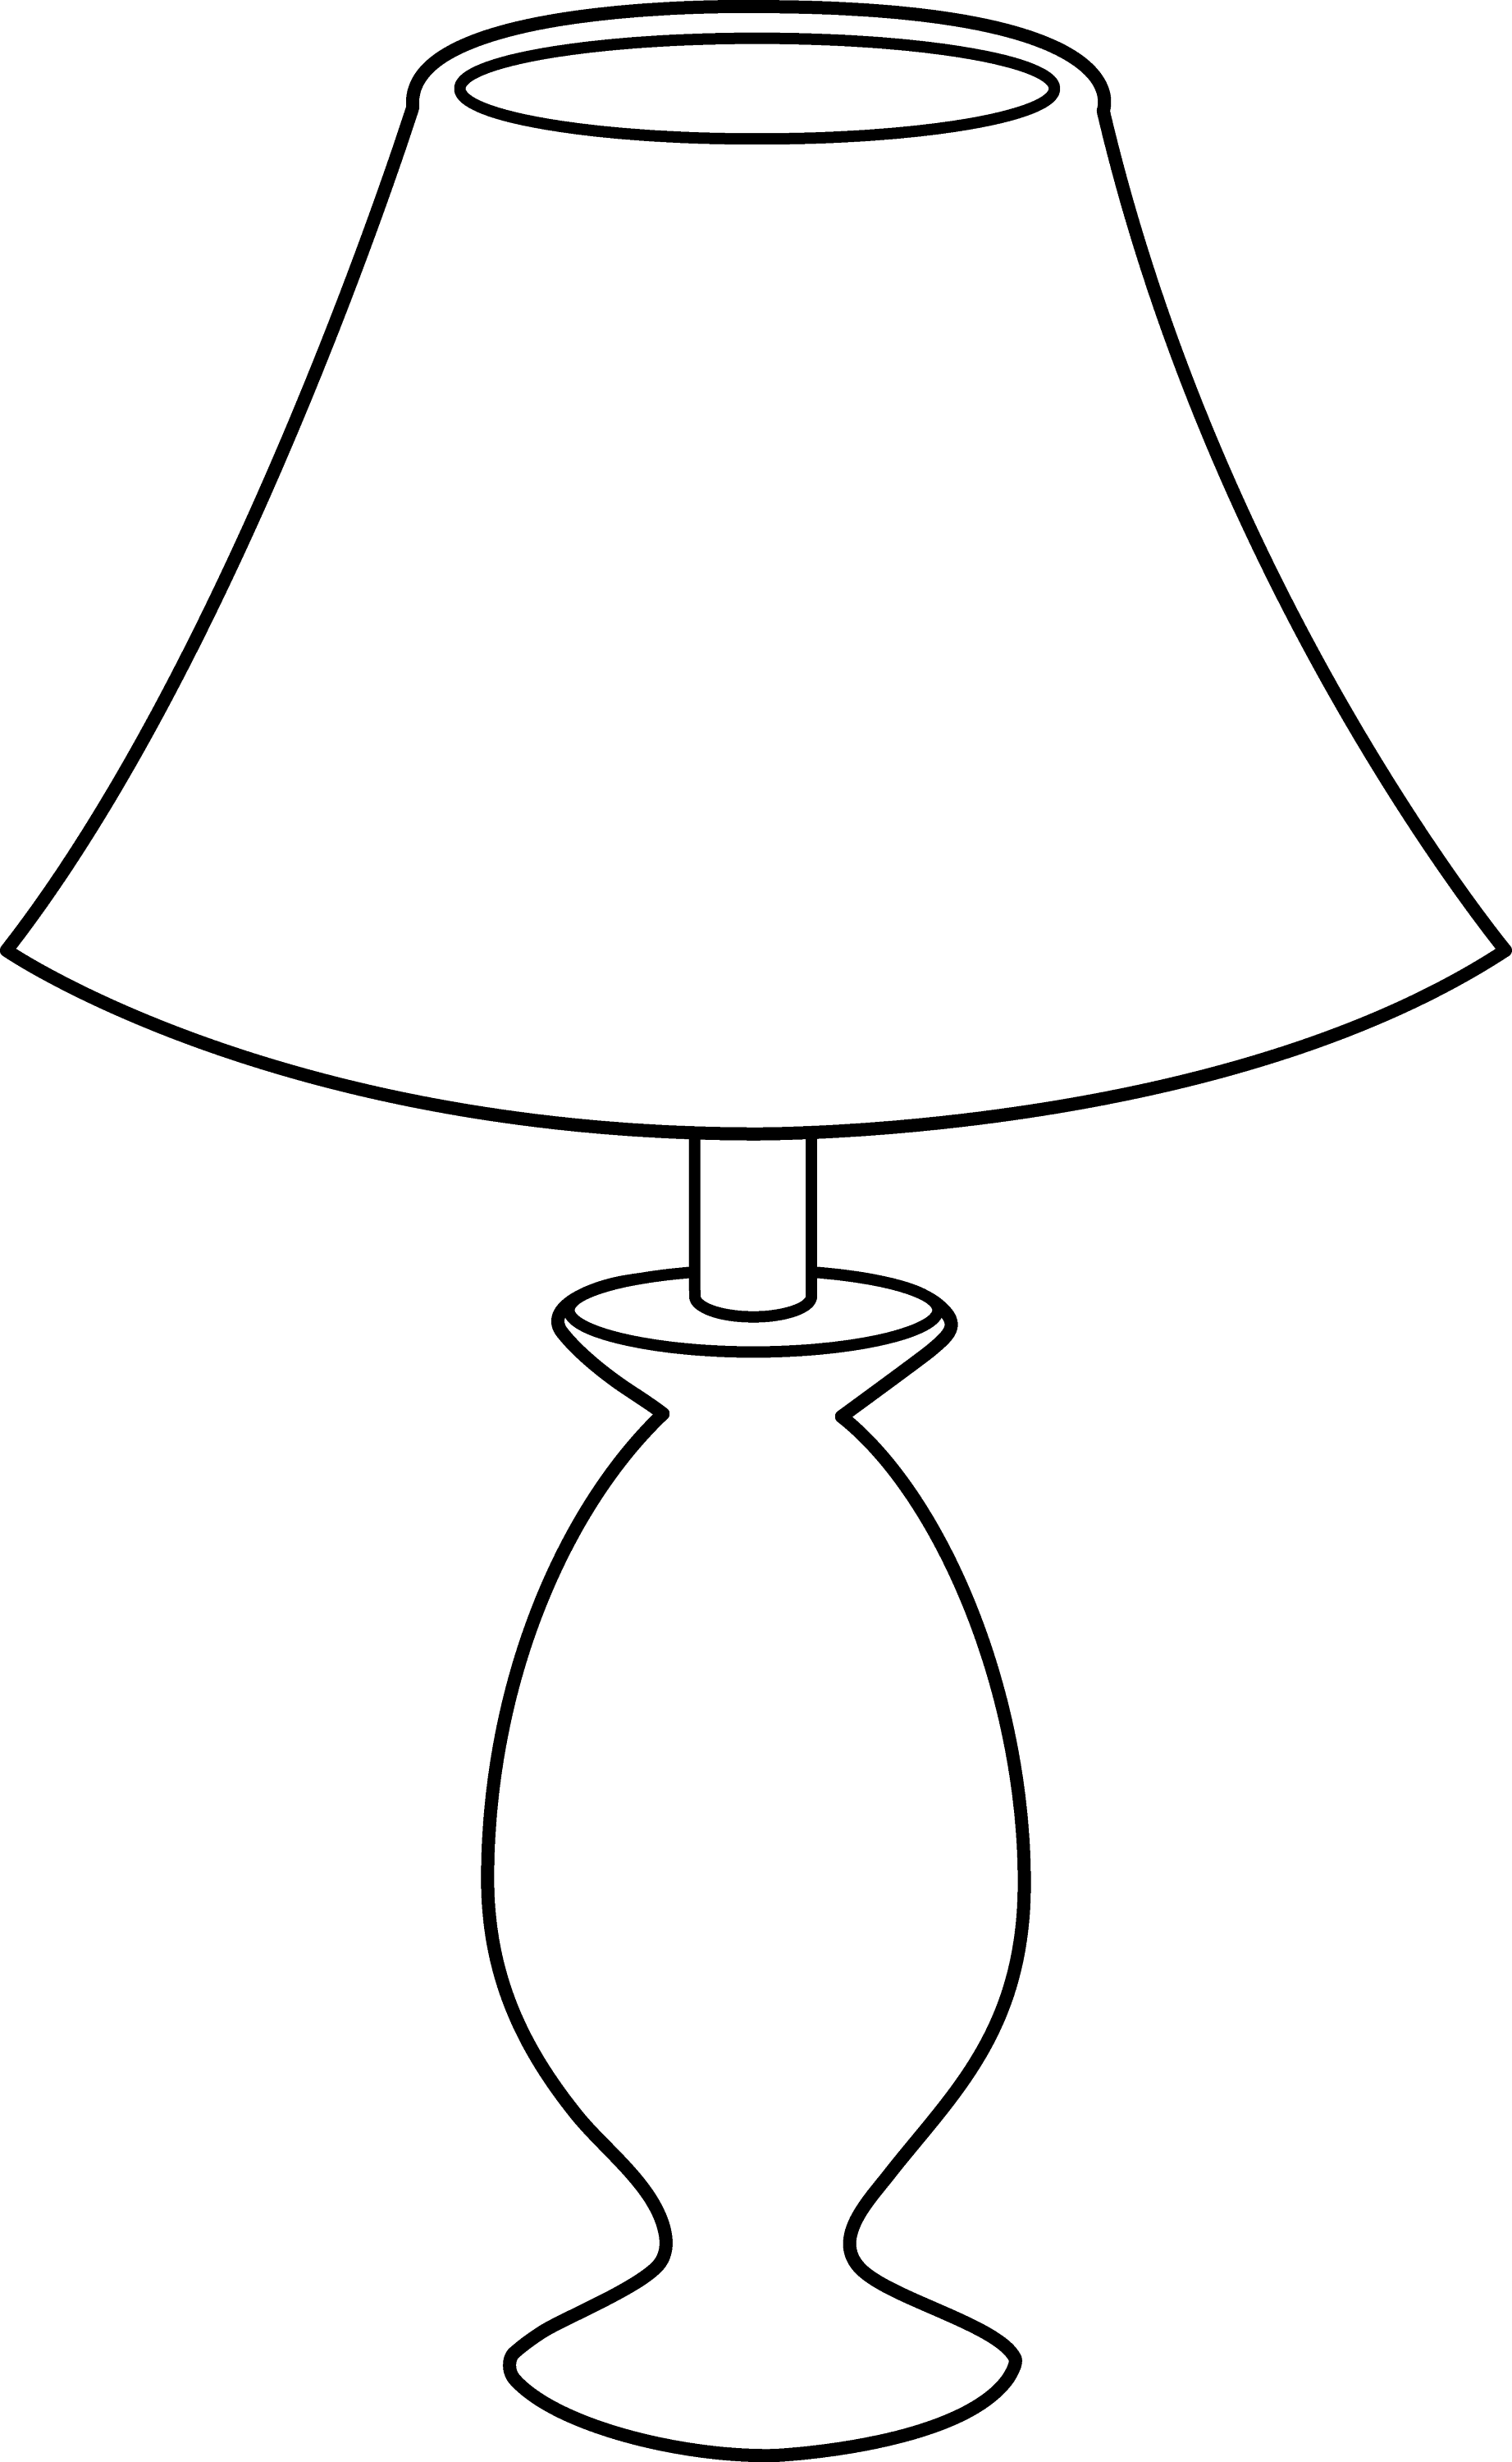 clipart black and white lamp - photo #1